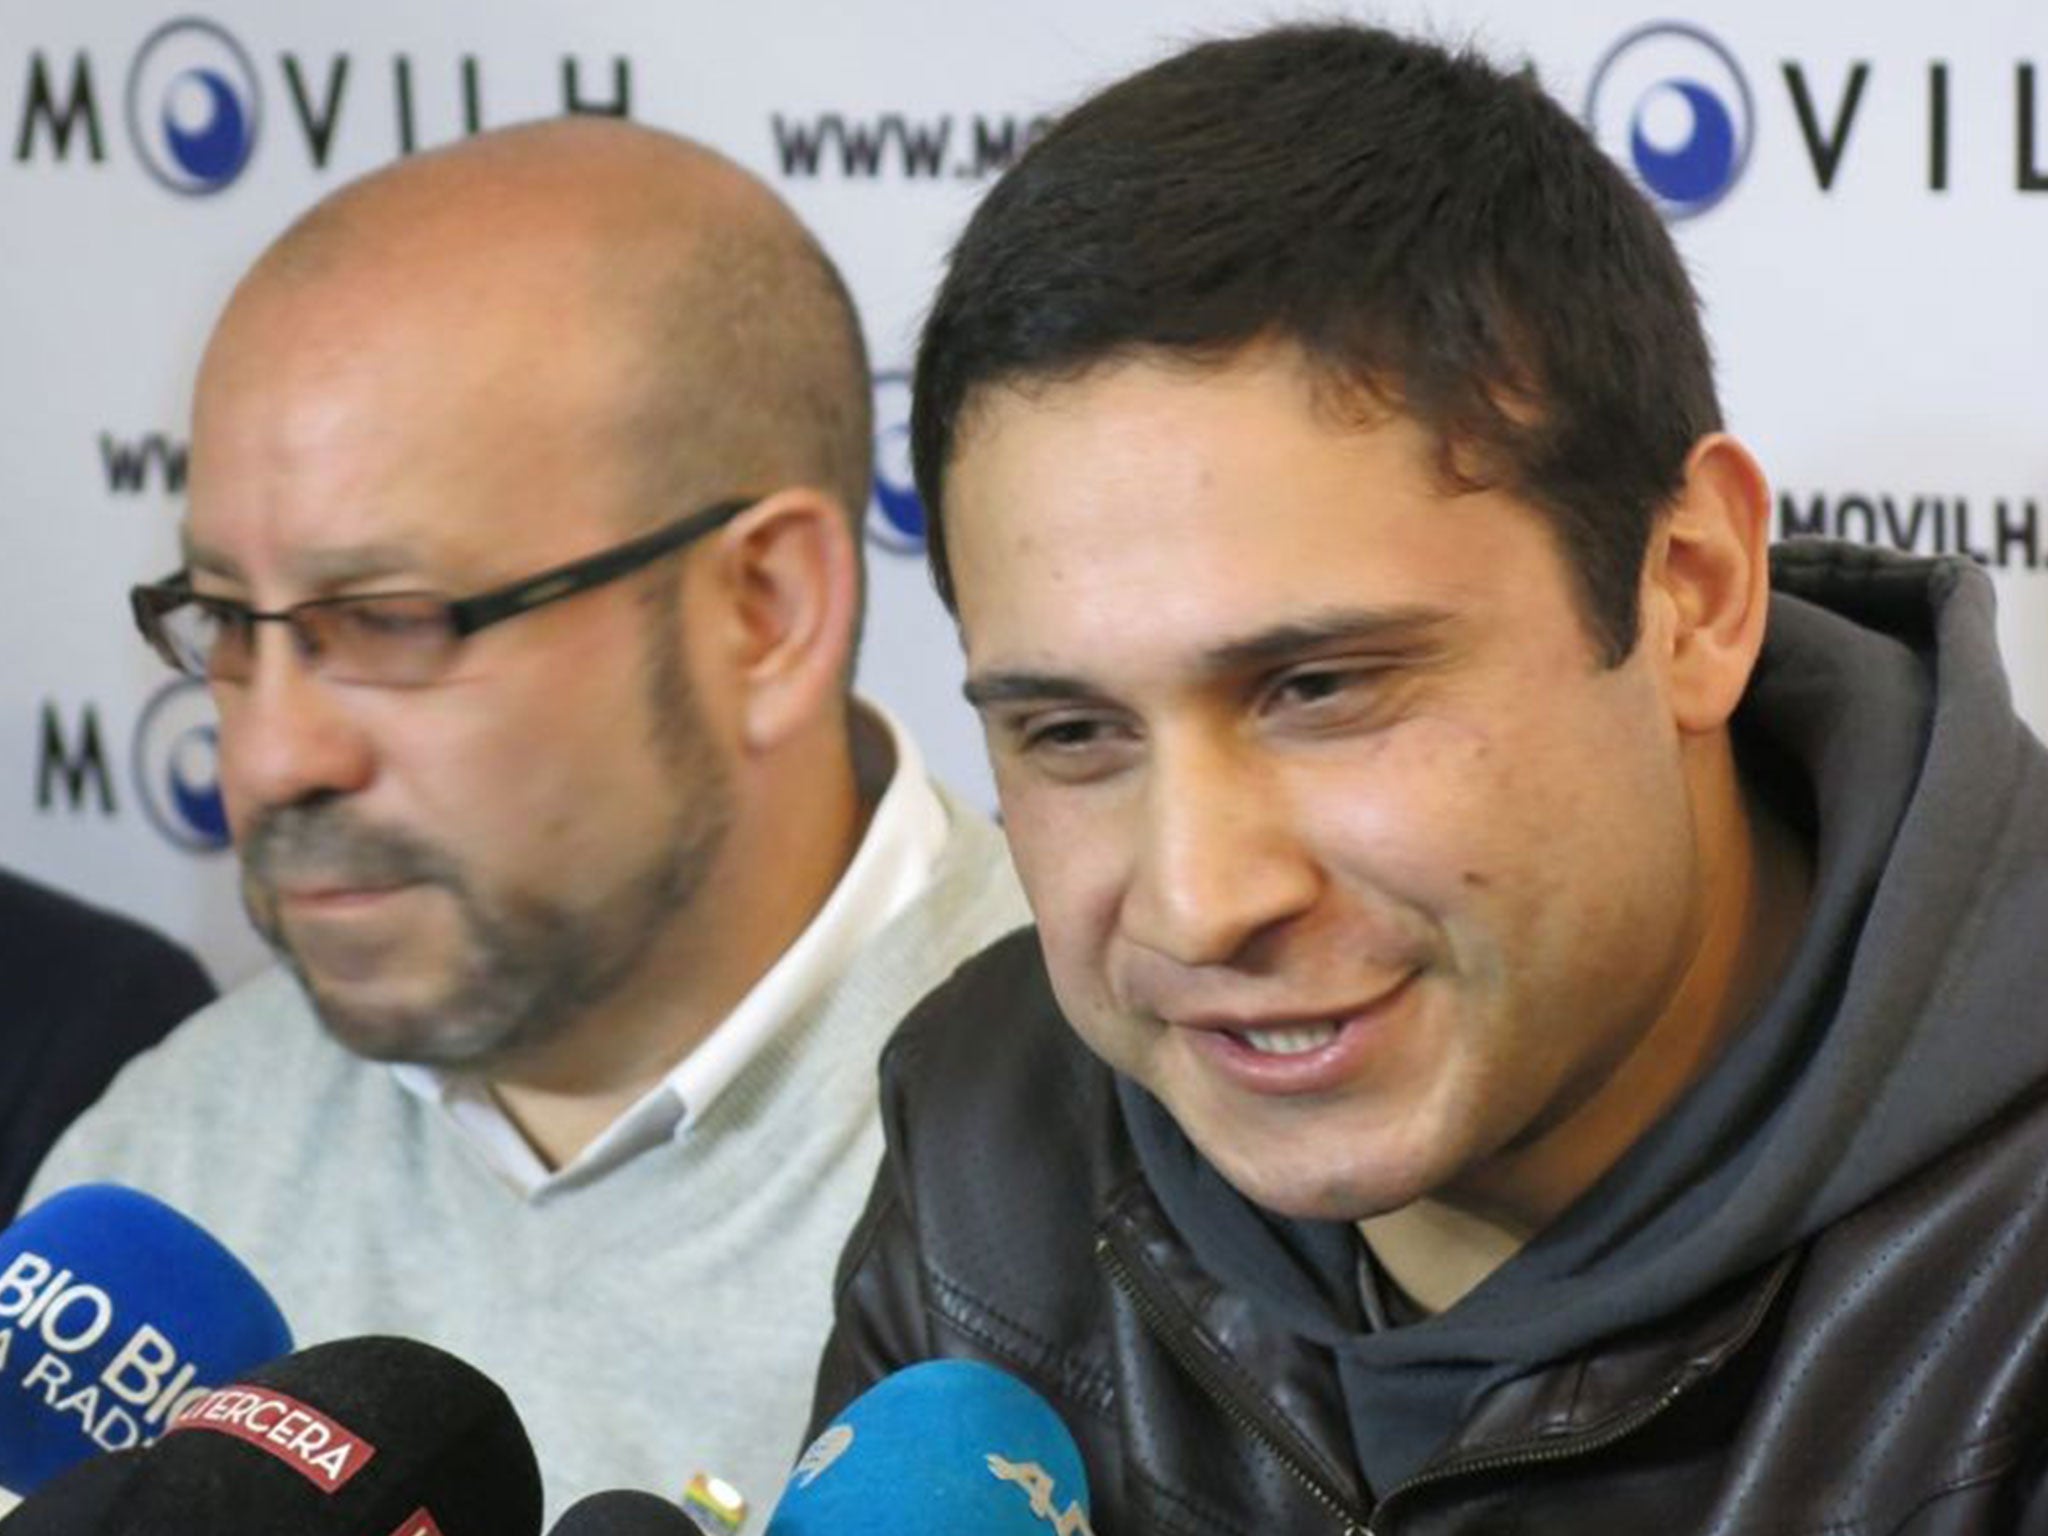 Chilean sailor Mauricio Ruiz, right, reveals he is gay during a press conference in Santiago